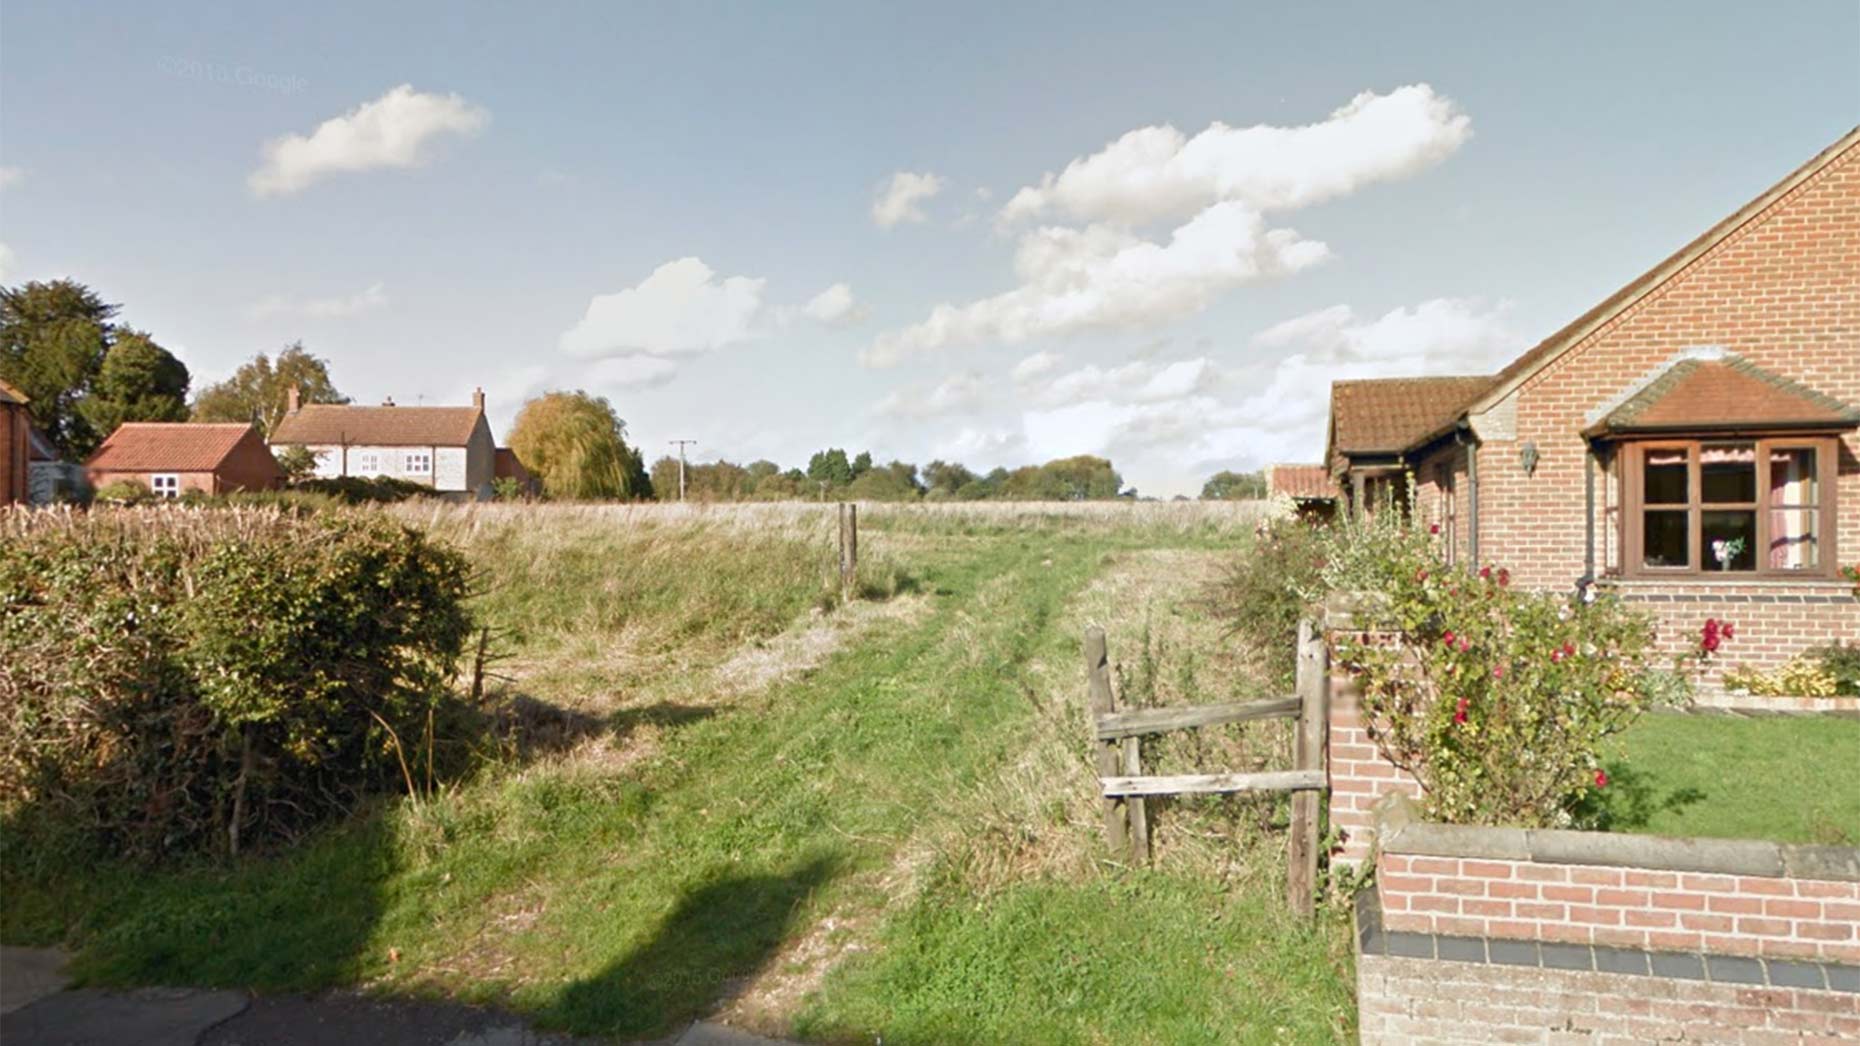 The view to the proposed estate from Barff Road. Photo: Google Street View